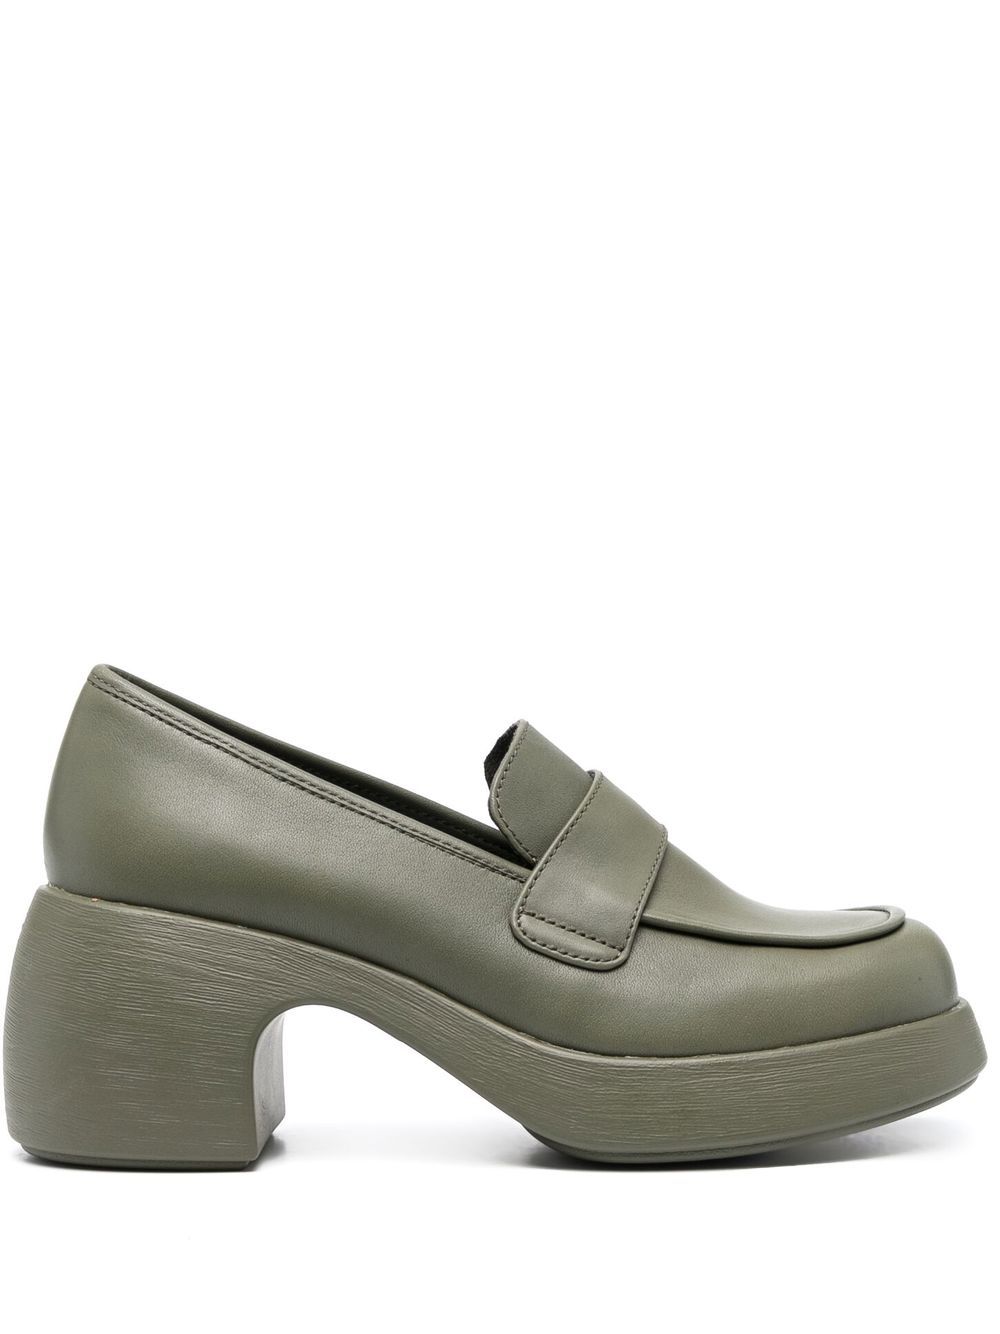 Camper Thelma 75mm leather loafers - Green von Camper